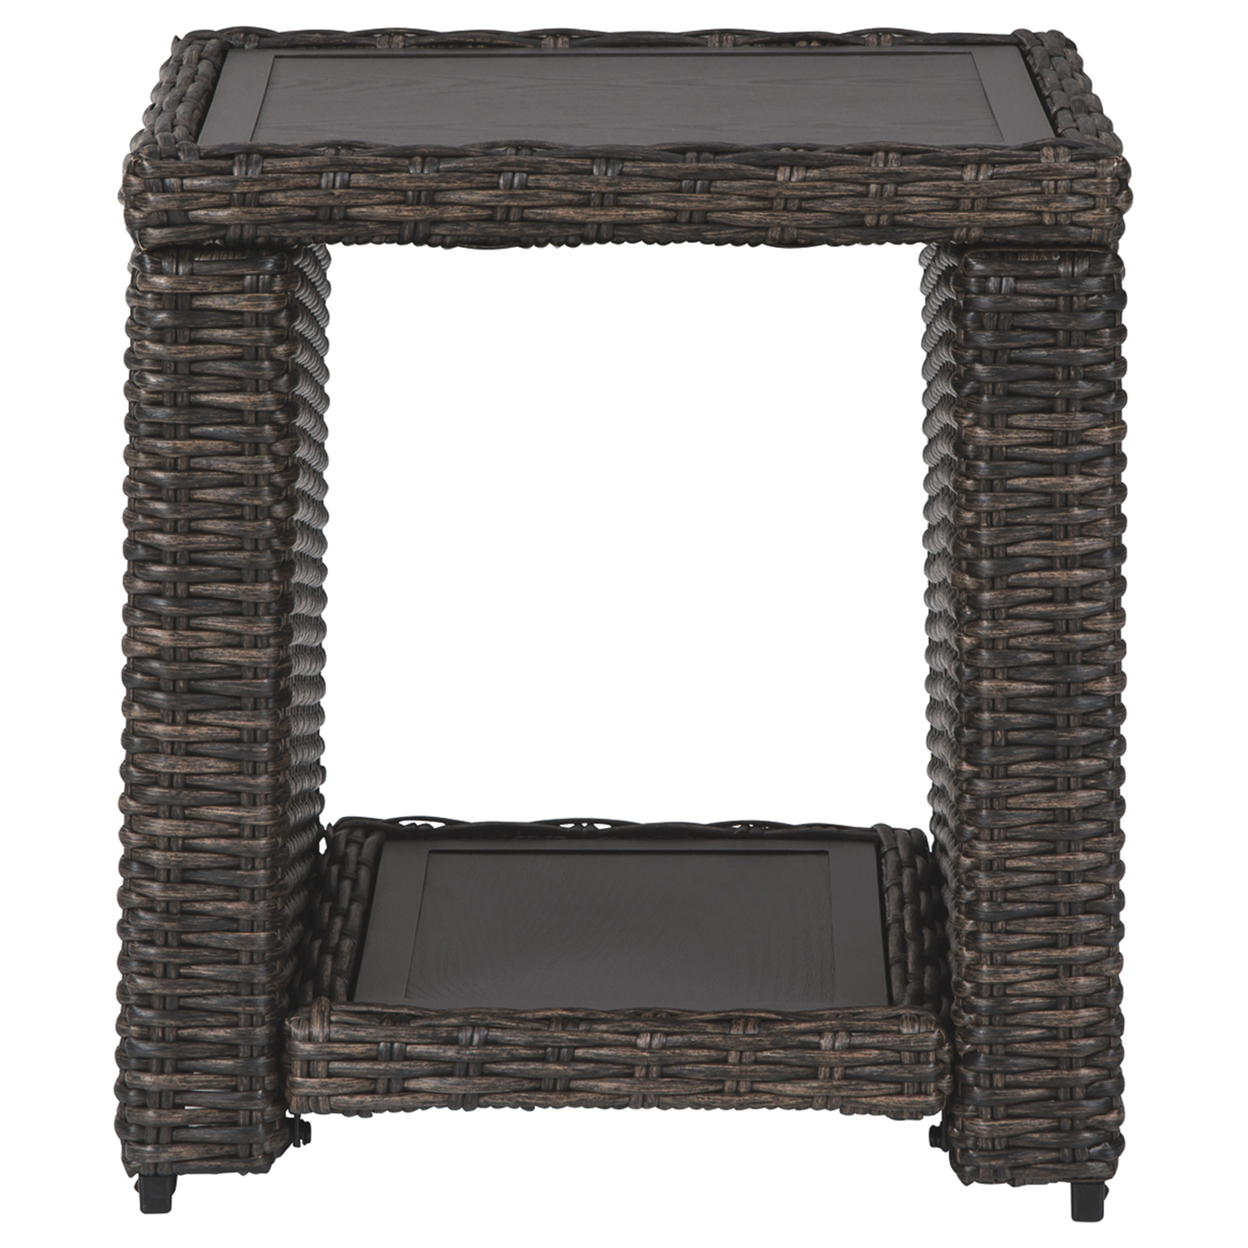 Handwoven Wicker End Table With Open Shelf, Brown And Black- Saltoro Sherpi